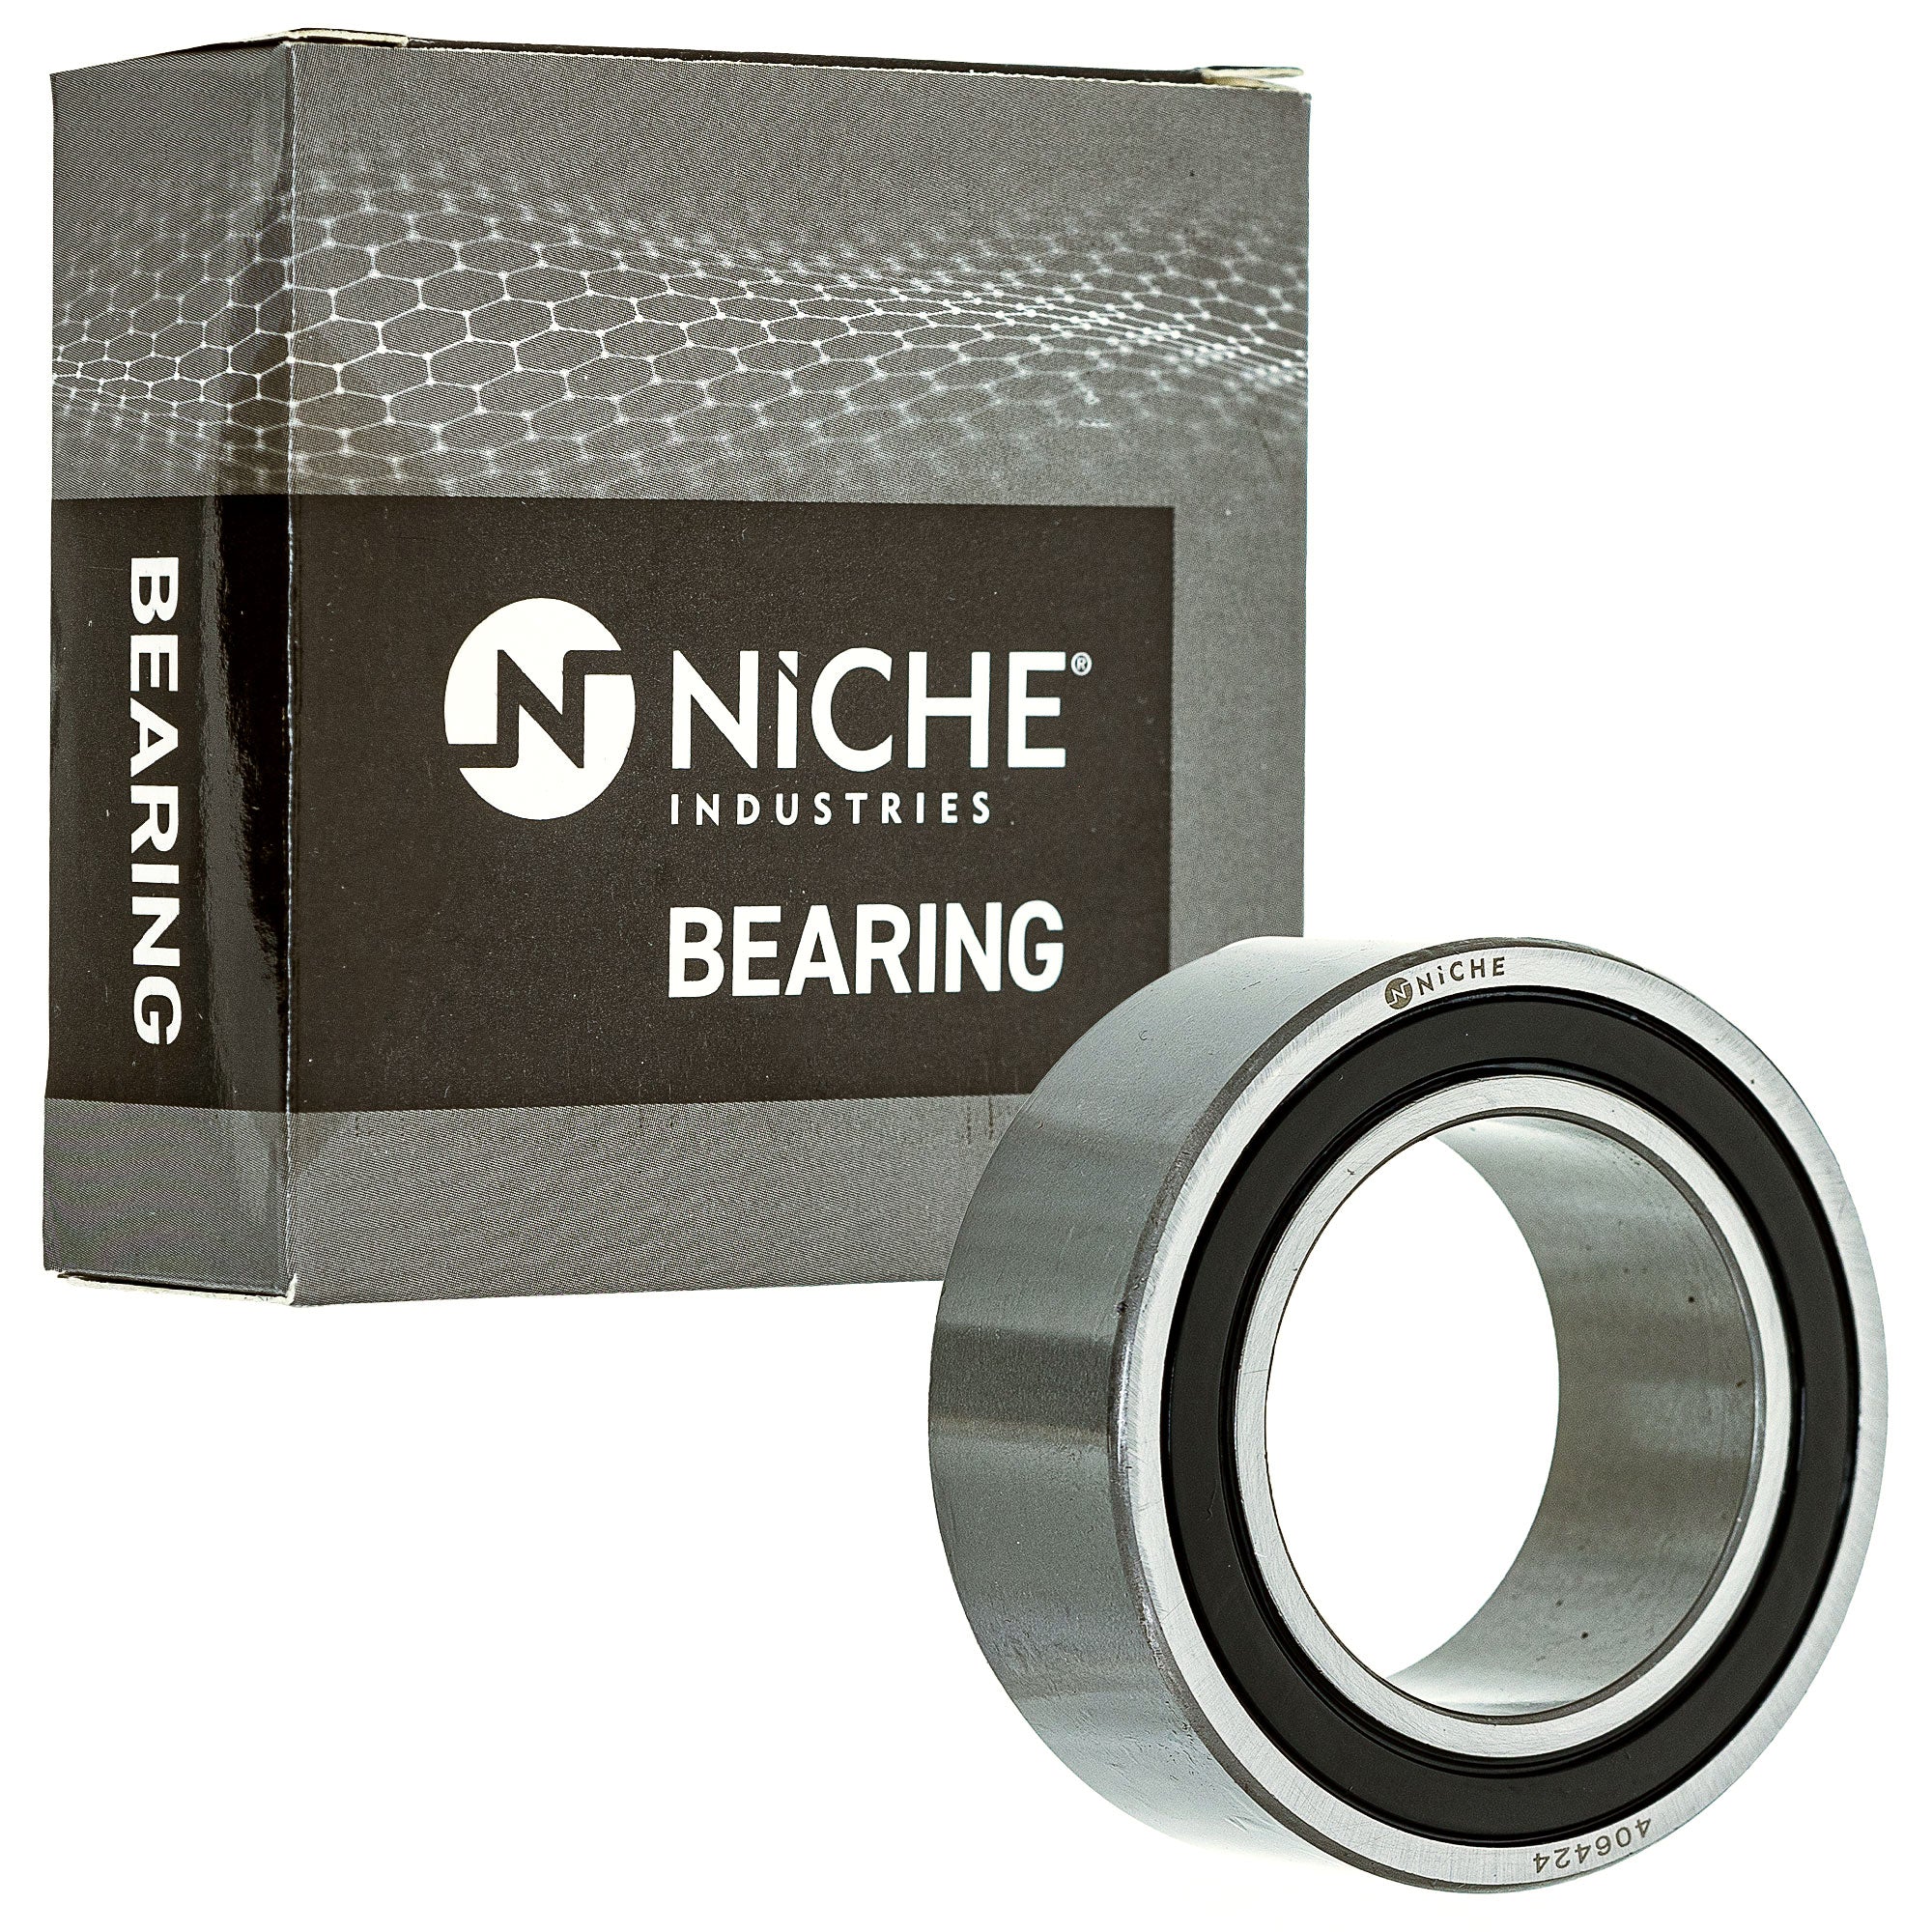 NICHE 519-CBB2205R Ball Bearing Pack of 2 2-Pack for zOTHER YFZ450XSE